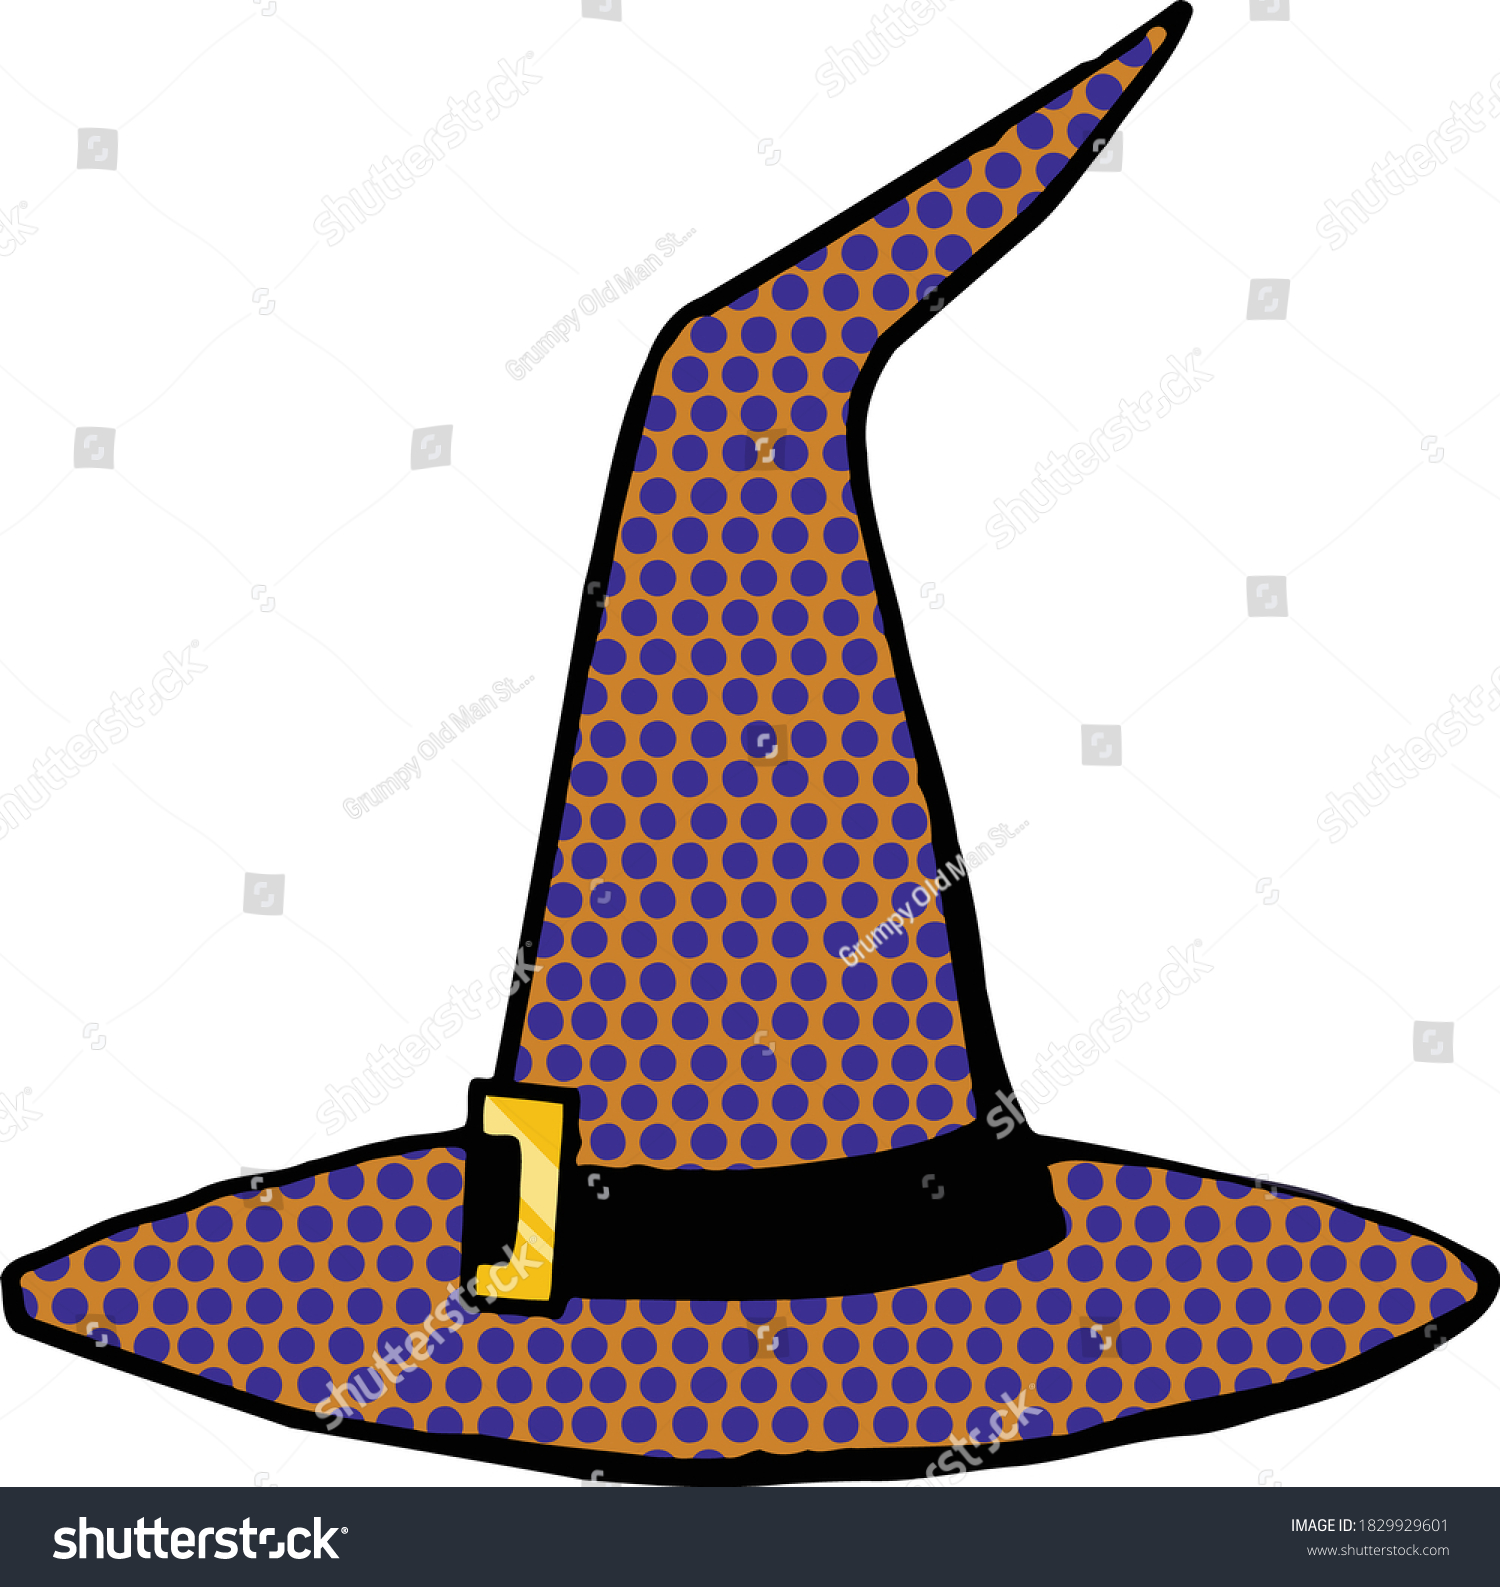 SVG of Trick or treat in style with these different witch's hats.  This clip art pack features a witch's hat in several different fun patterns including buffalo plaid and argyle patterns. svg